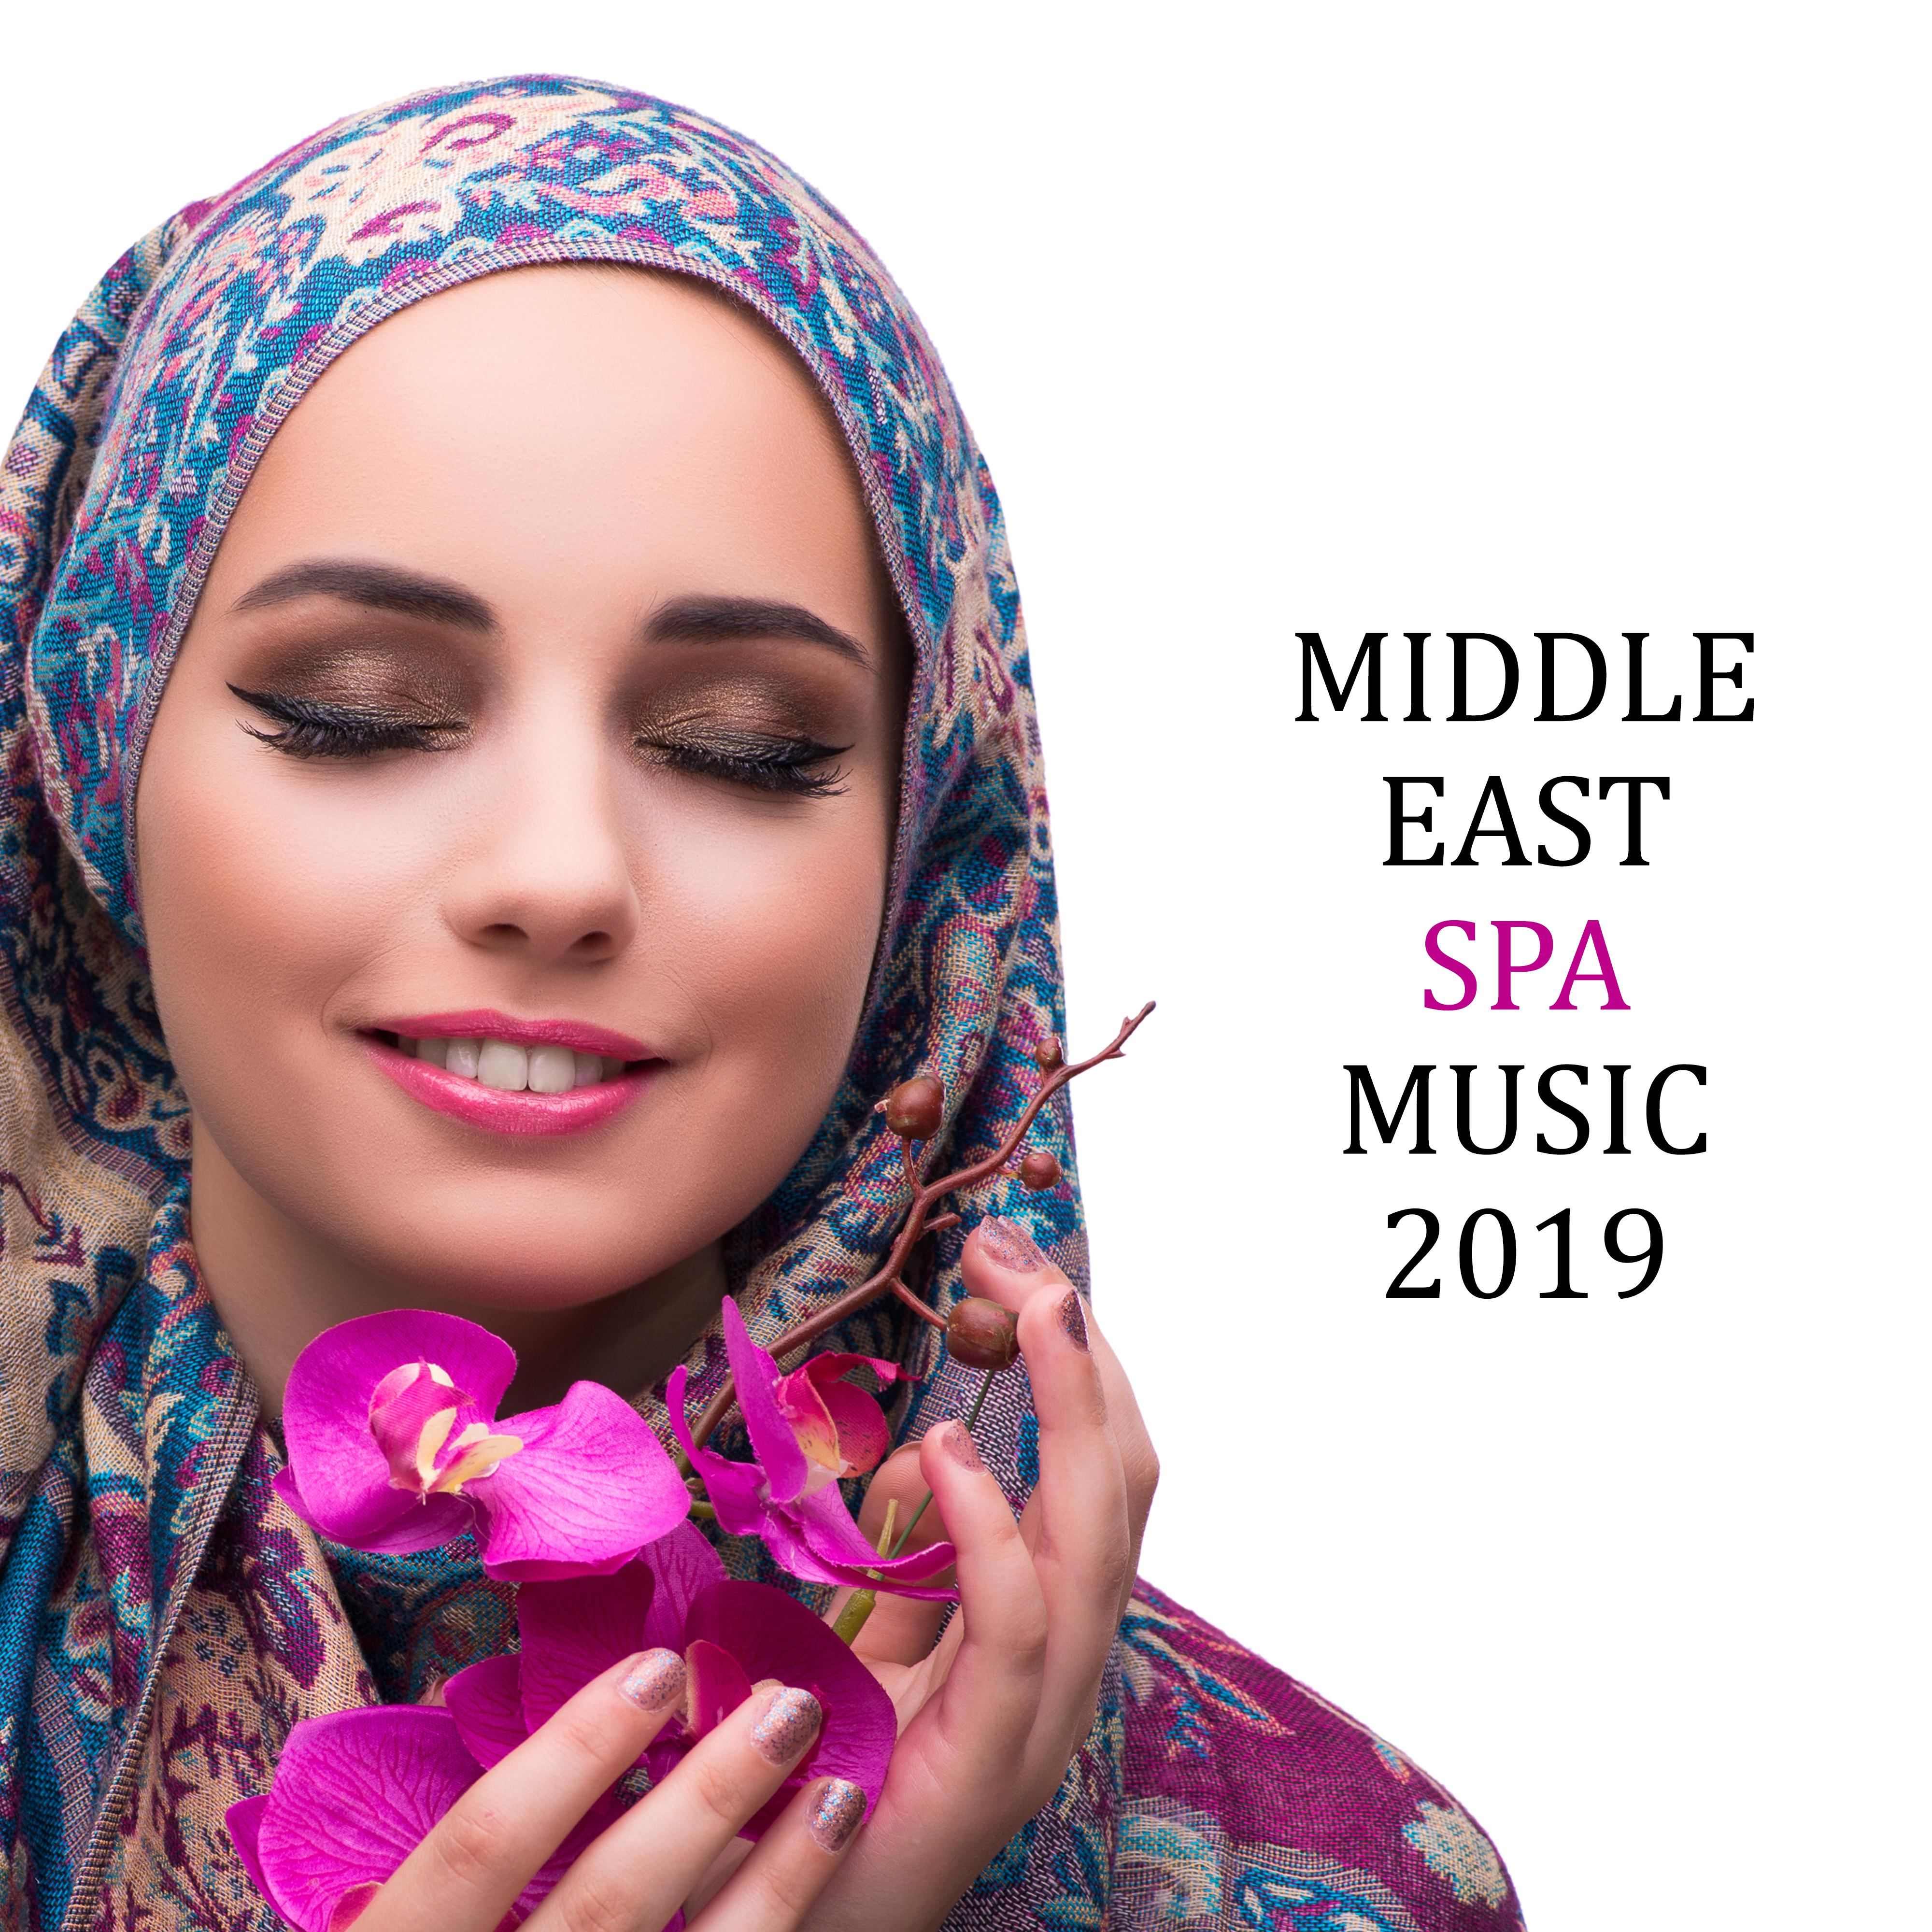 Middle East Spa Music 2019